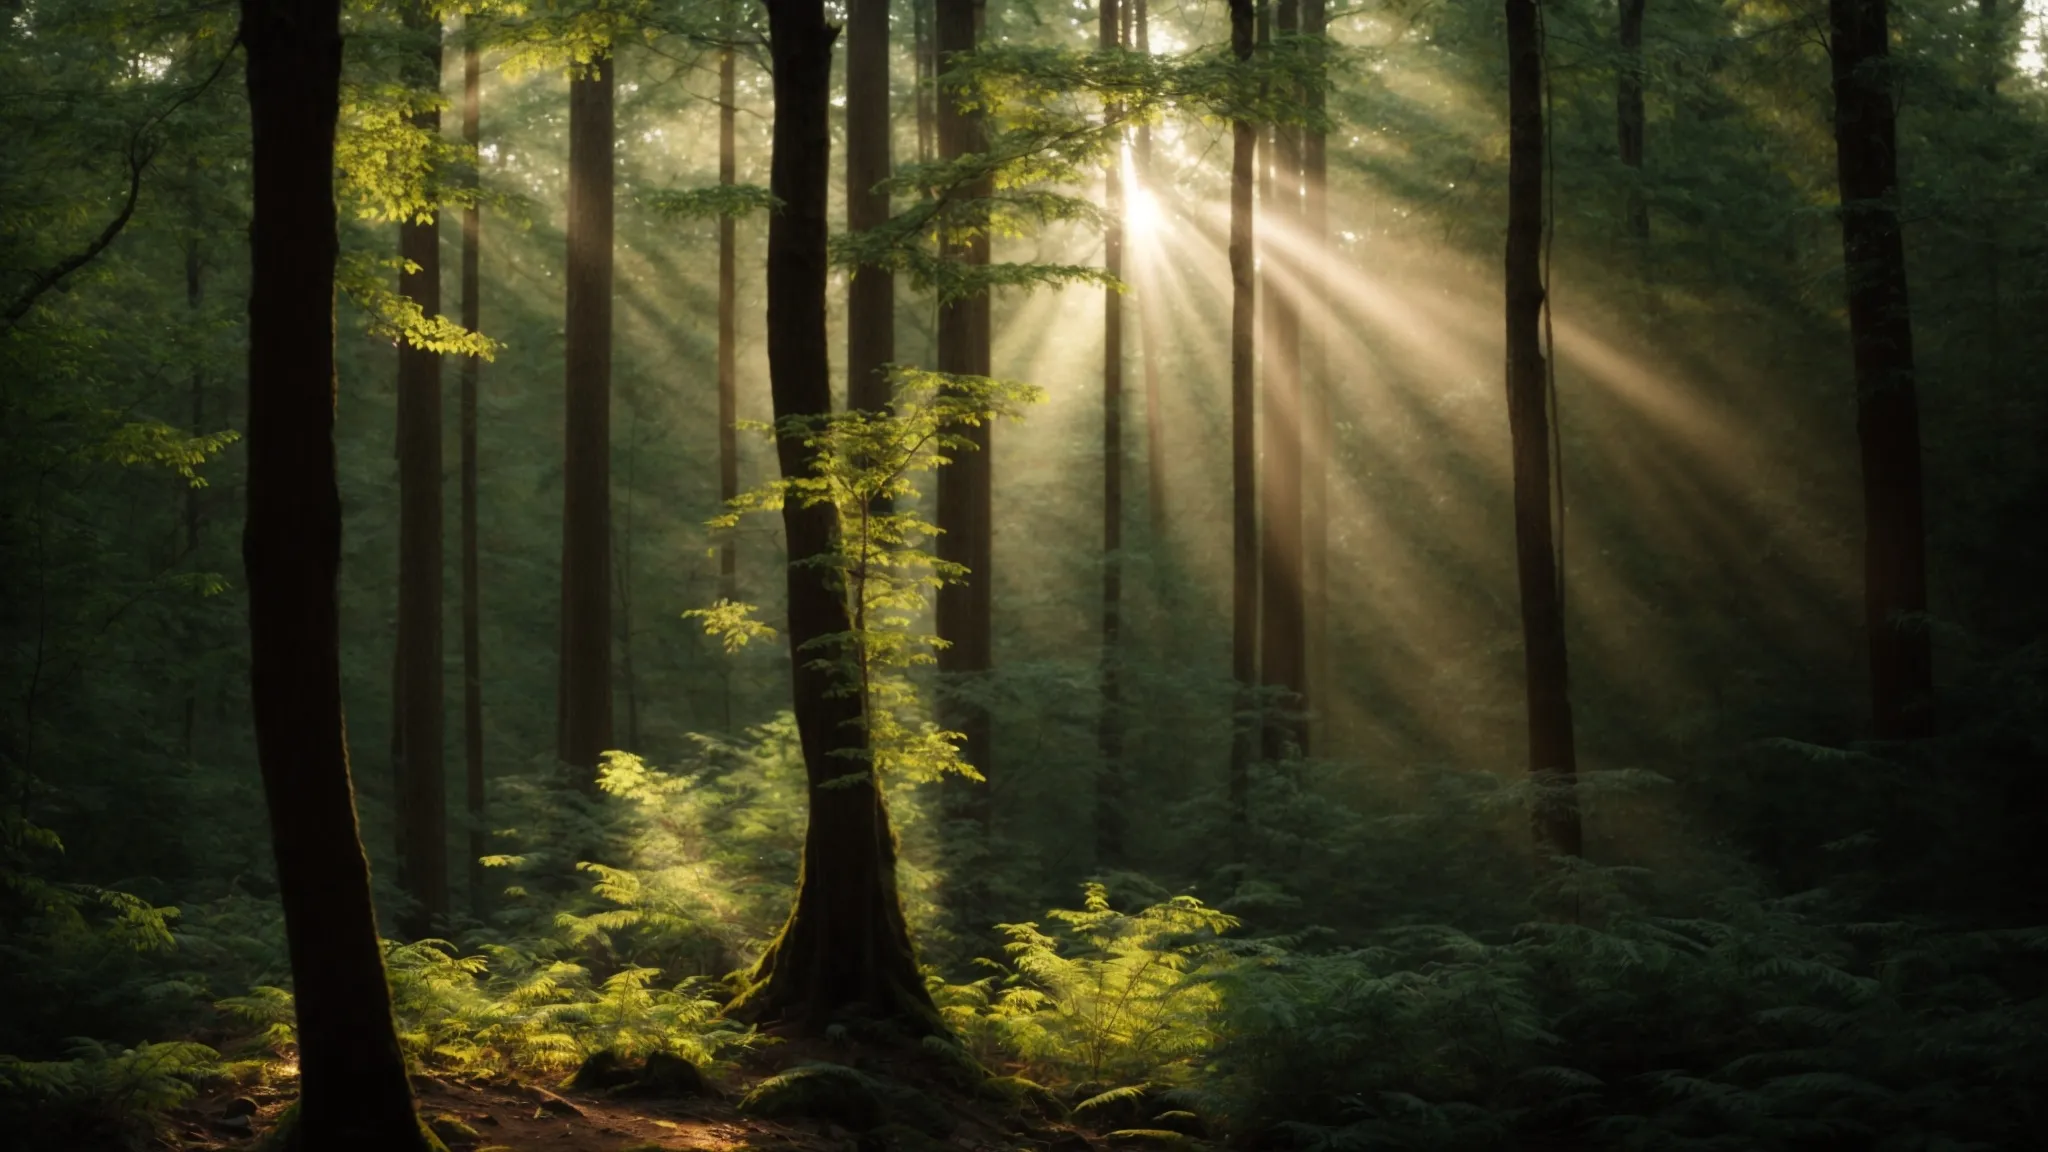 a beam of sunlight pierces through the dense forest canopy, illuminating a single, small sapling growing among towering trees.